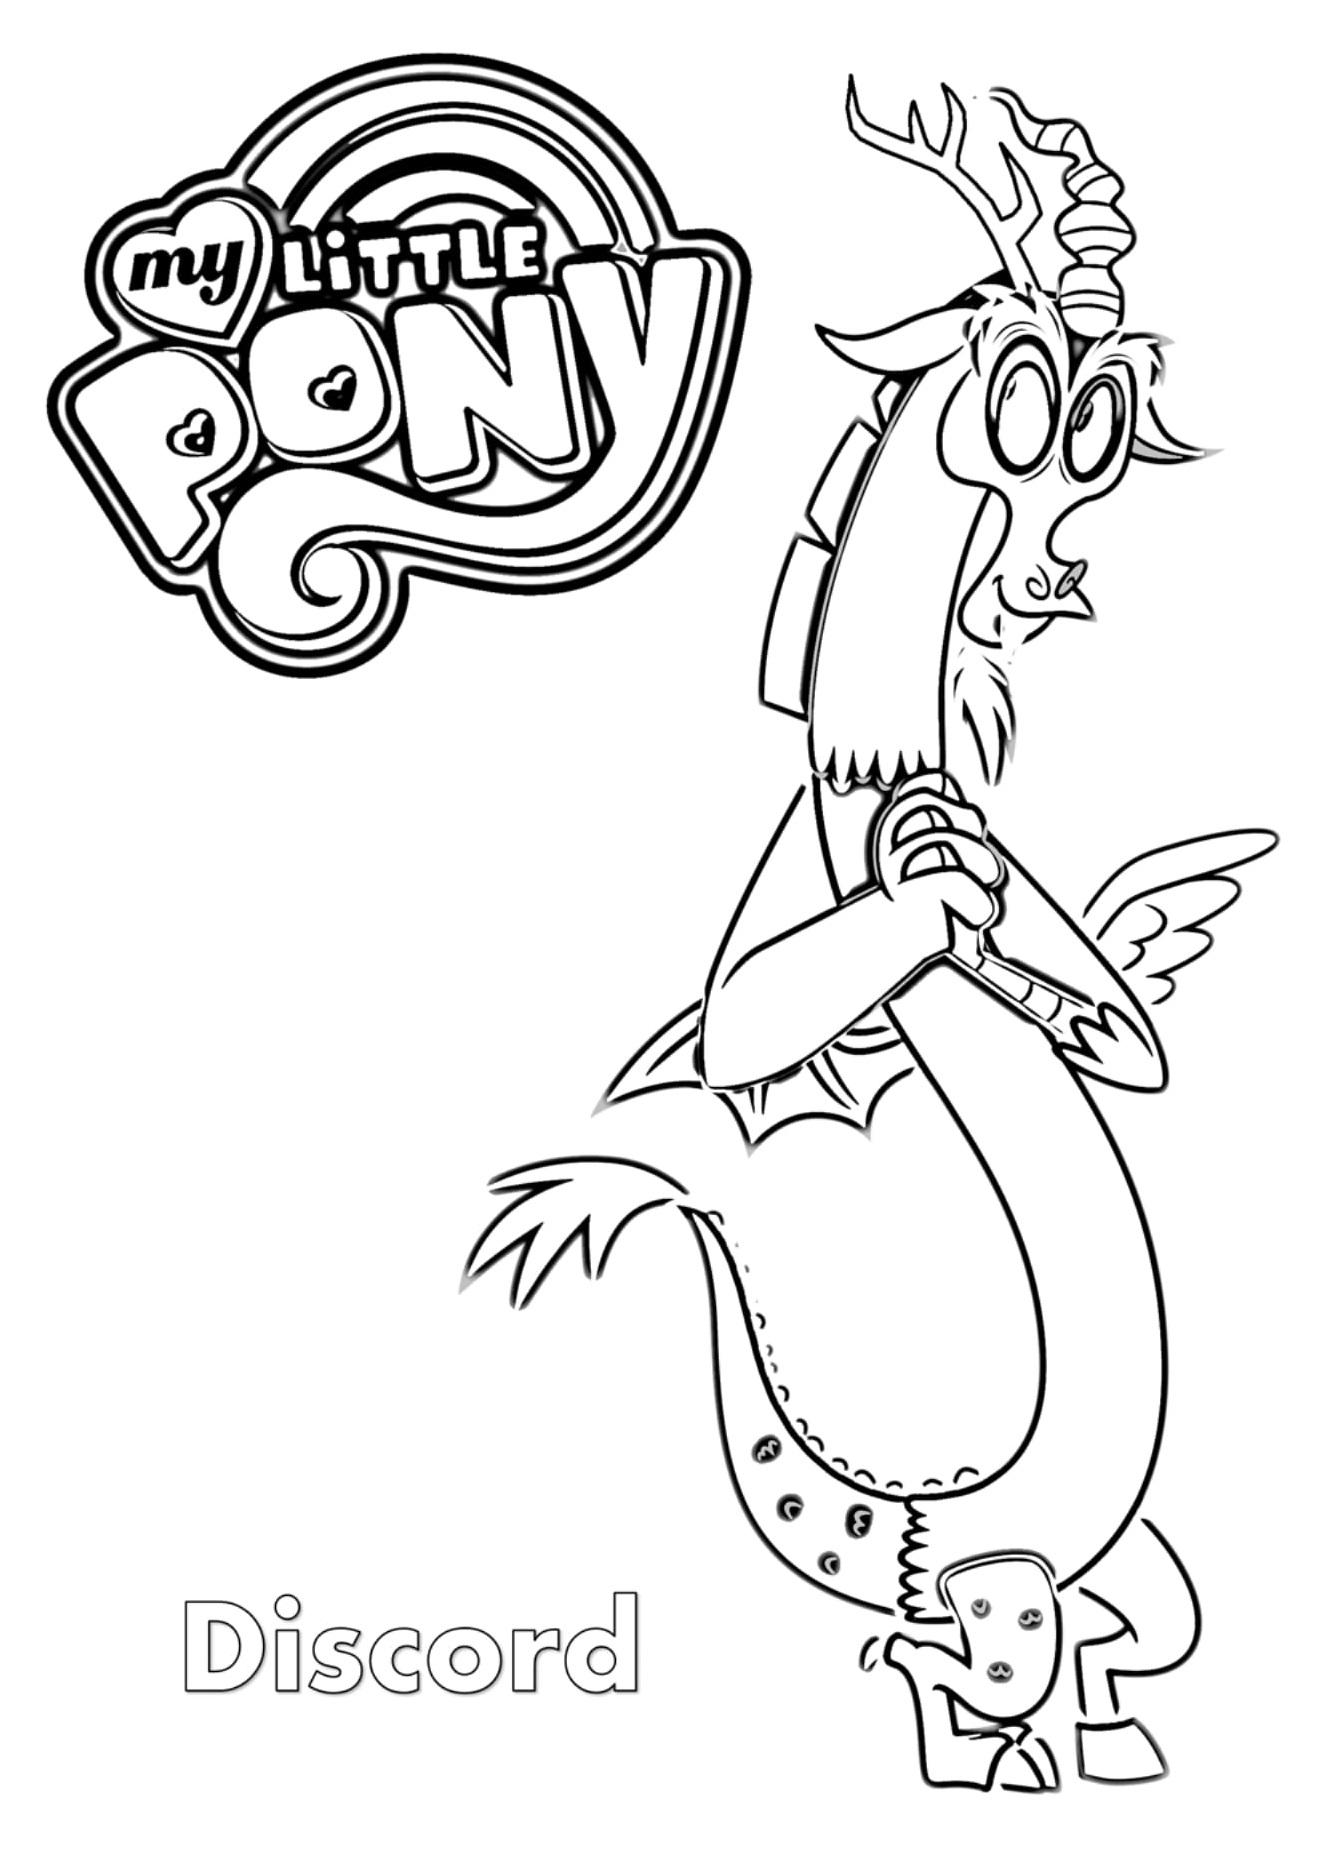 Discord MLP Coloring Page